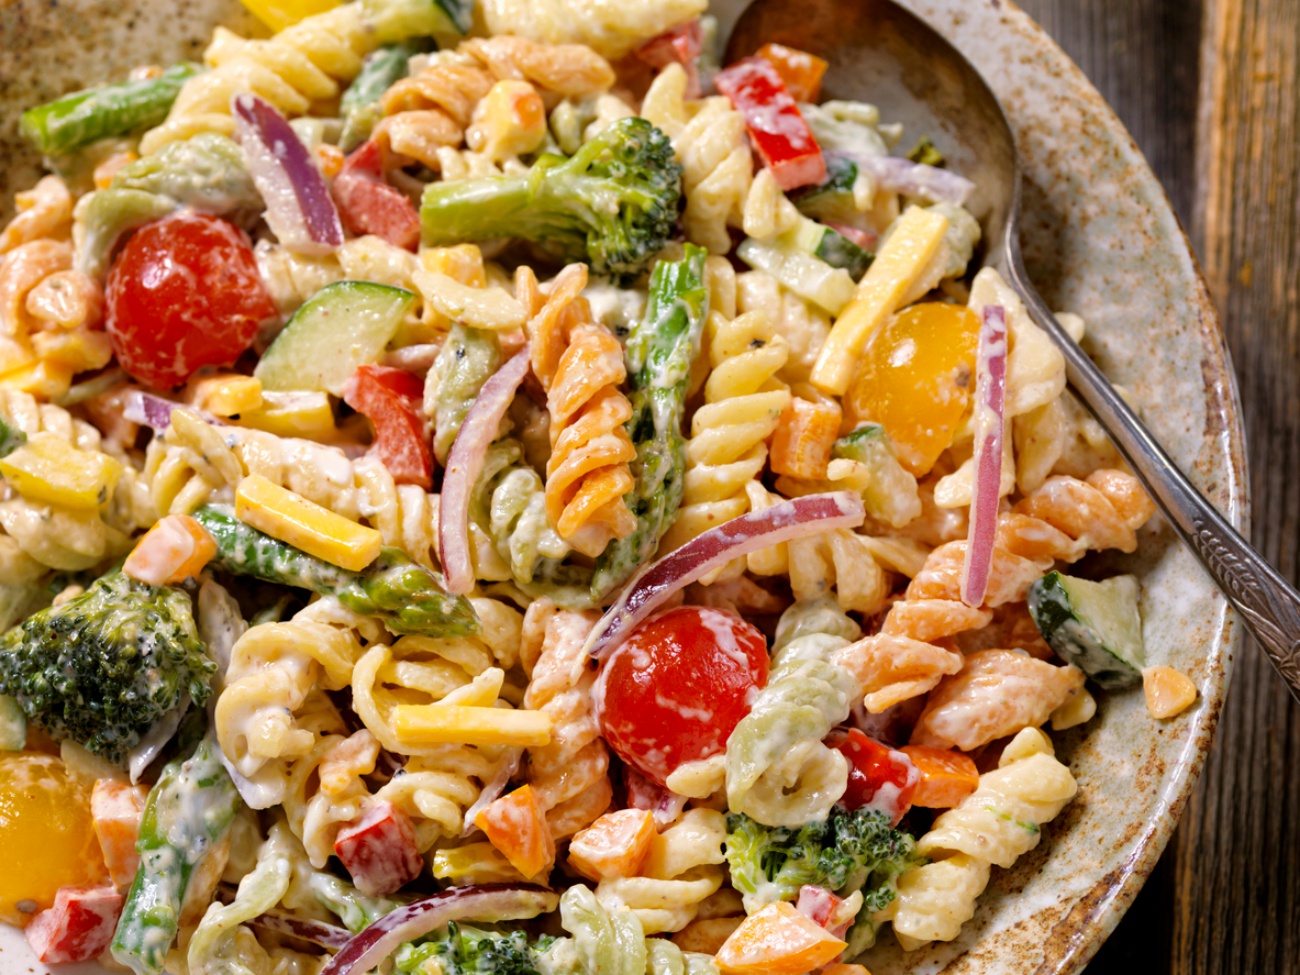 Eat at an Endless Buffet & We'll Guess Your Age & Gender Quiz Creamy Pasta and Vegetable Salad